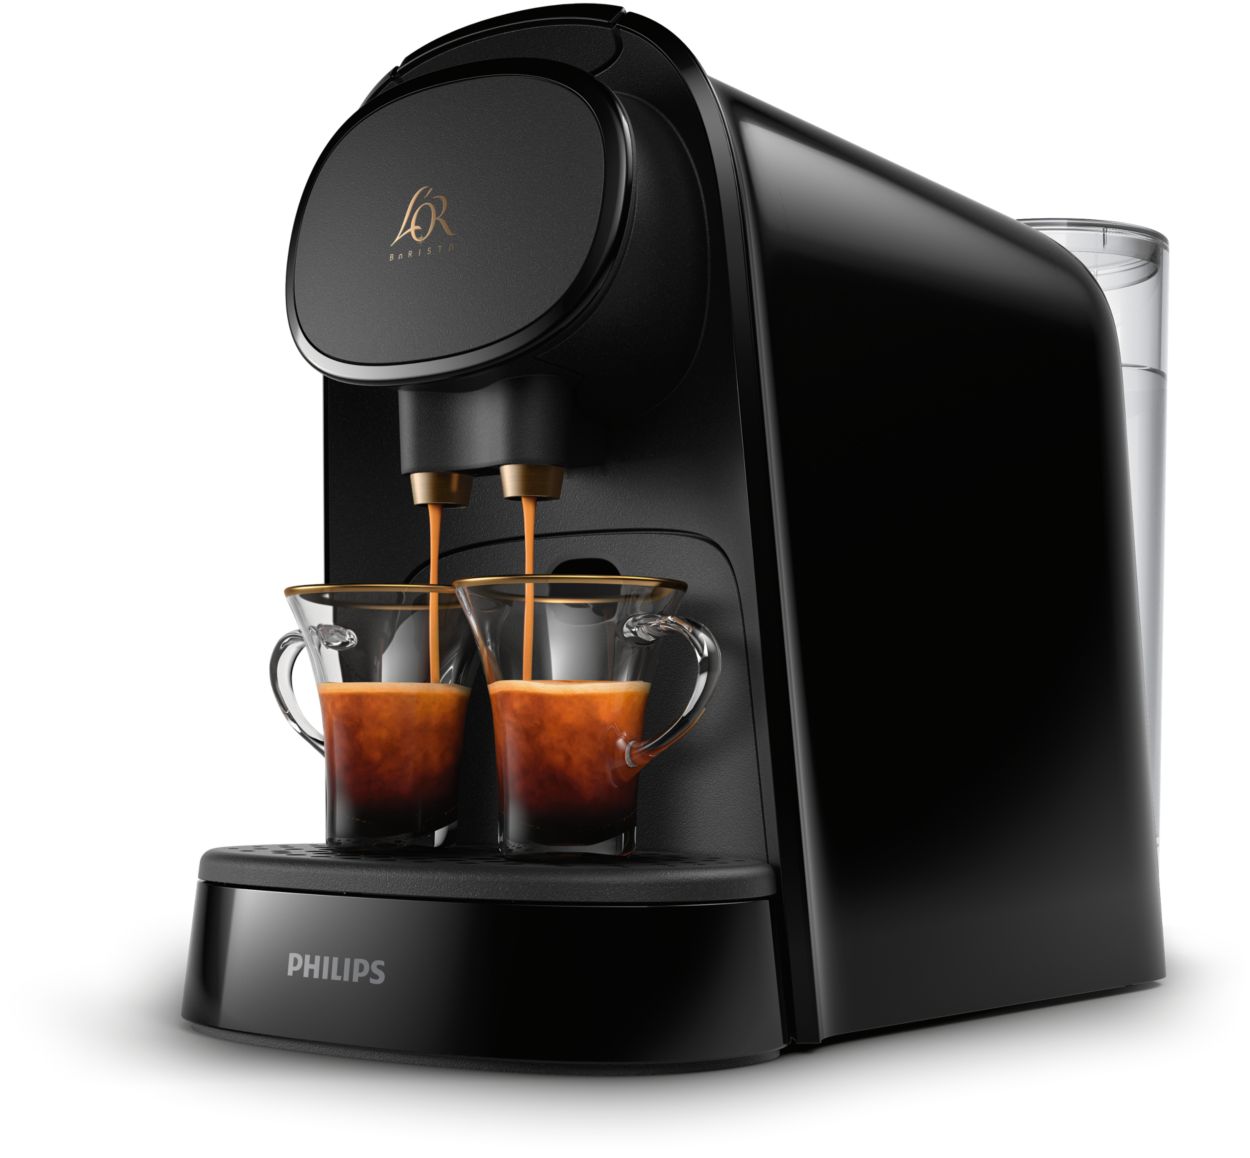 CAFETERA NESPRESSO PHILIPS LM8012 L'OR BLANCA